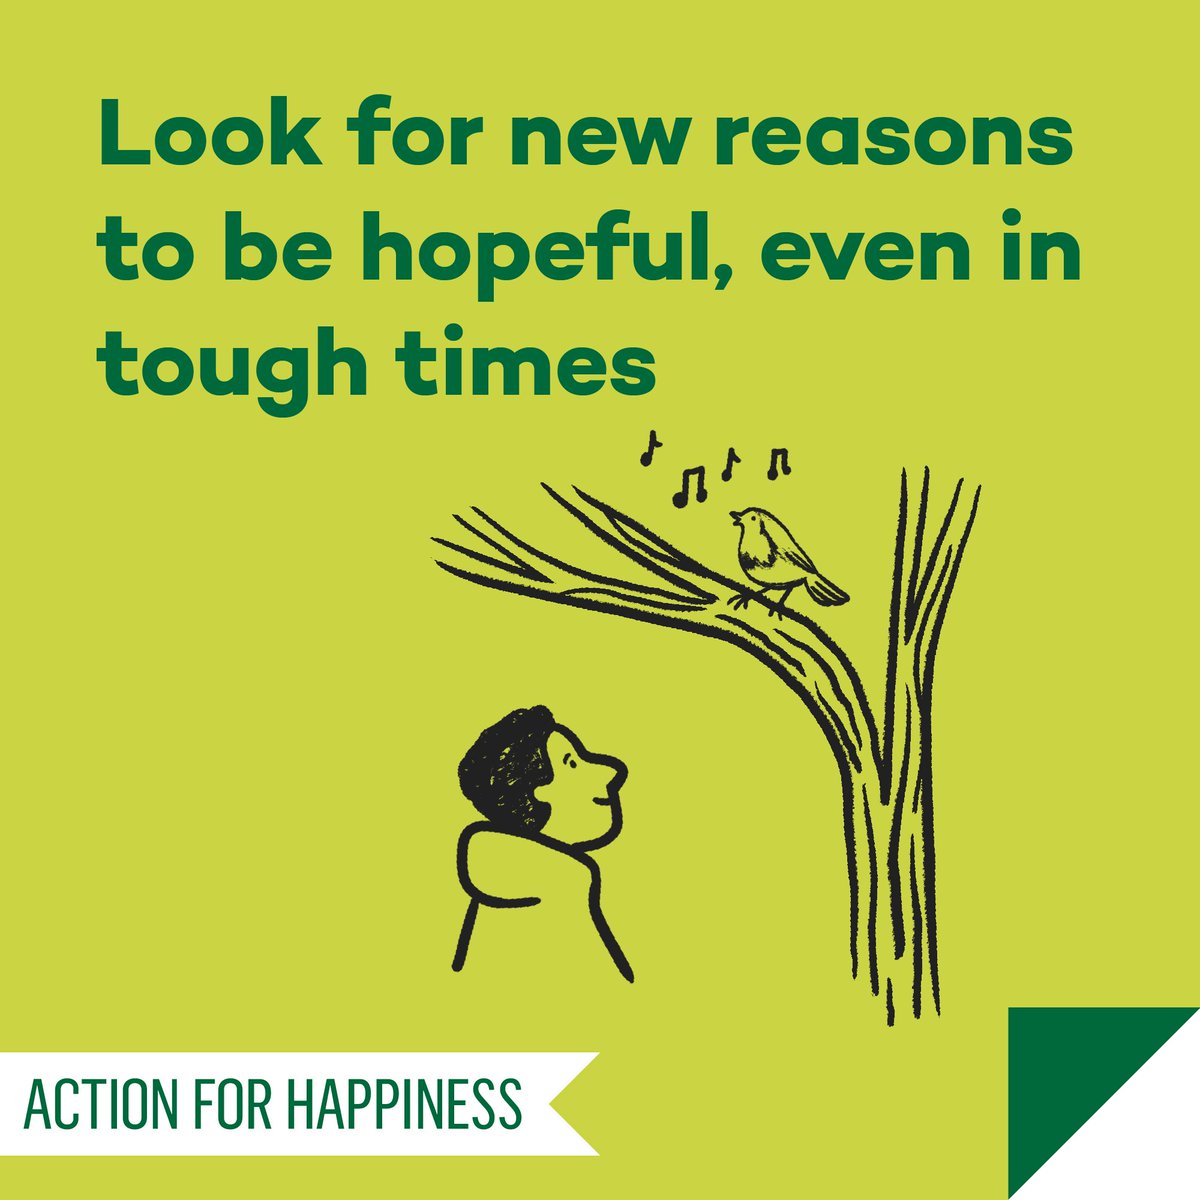 New Ways November - Day 30: Look for new reasons to be hopeful, even in tough times actionforhappiness.org/new-ways-novem… #NewWaysNovember